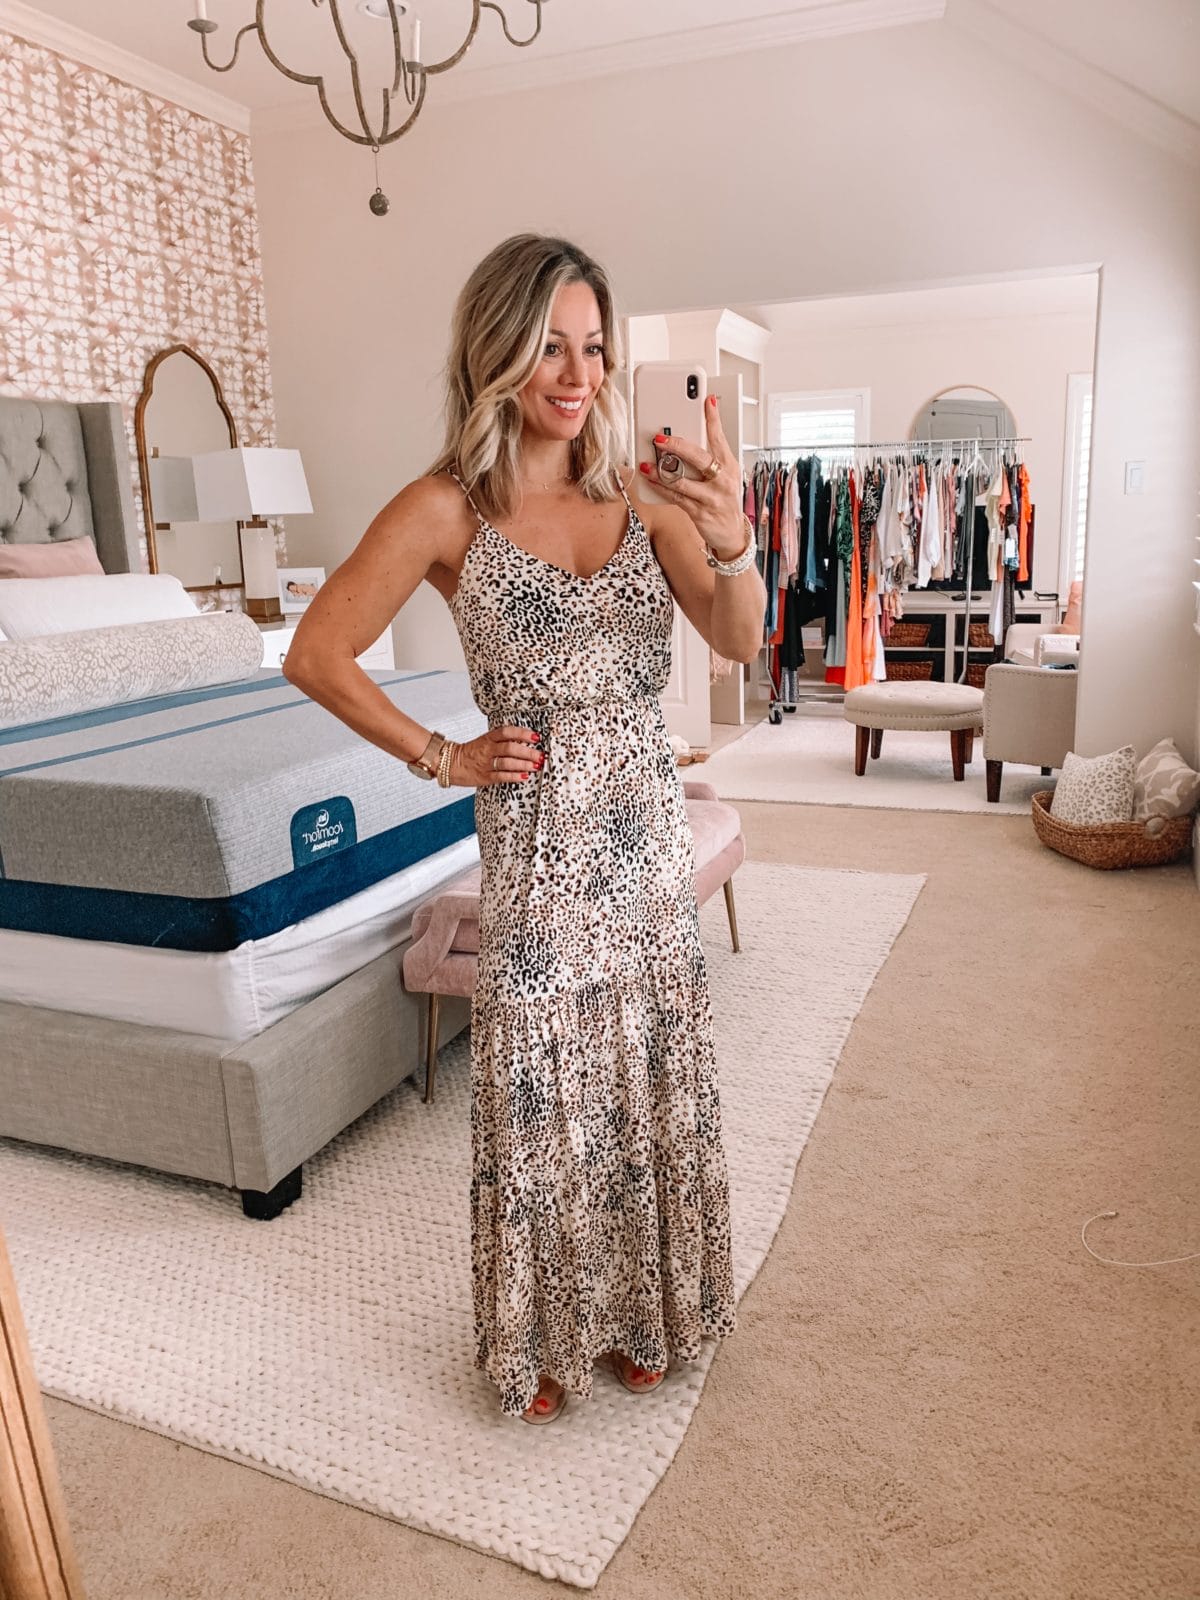 Dressing Room Finds Nordstrom and Target, Leopard Print Maxi